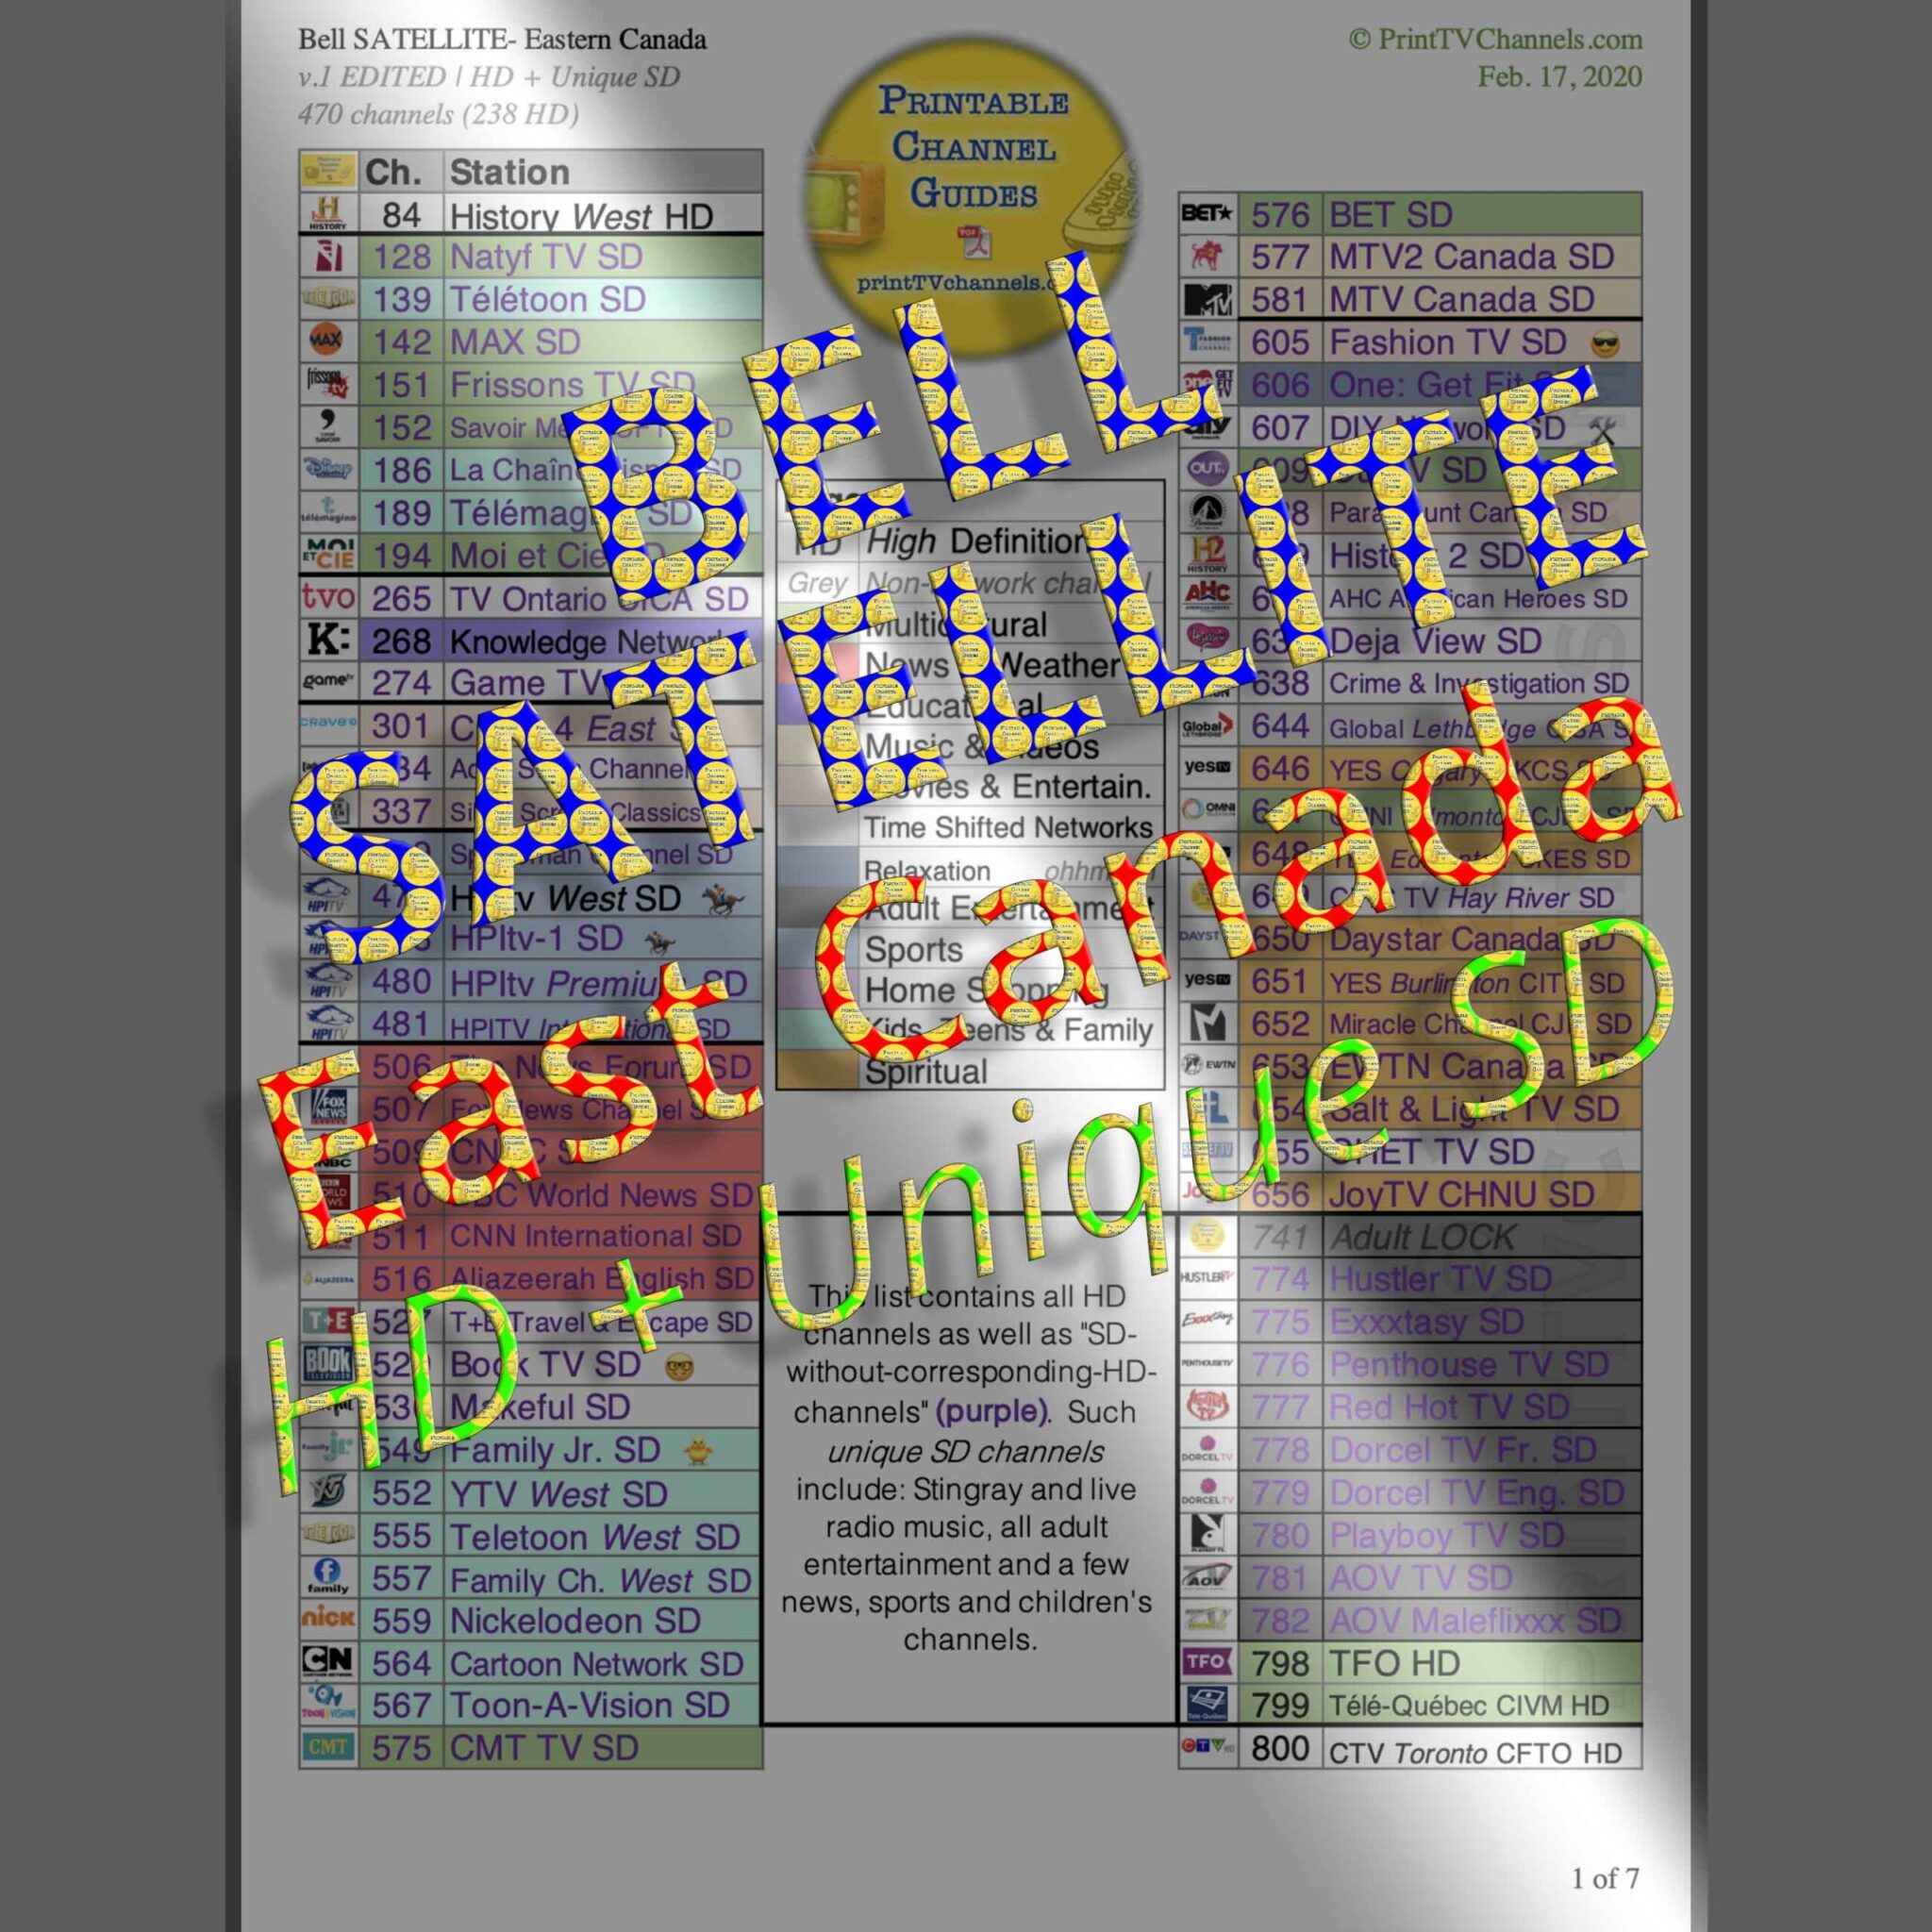 Preview Image: Bell Satellite TV Channel Listings | EASTERN Canada | HD + Unique SD